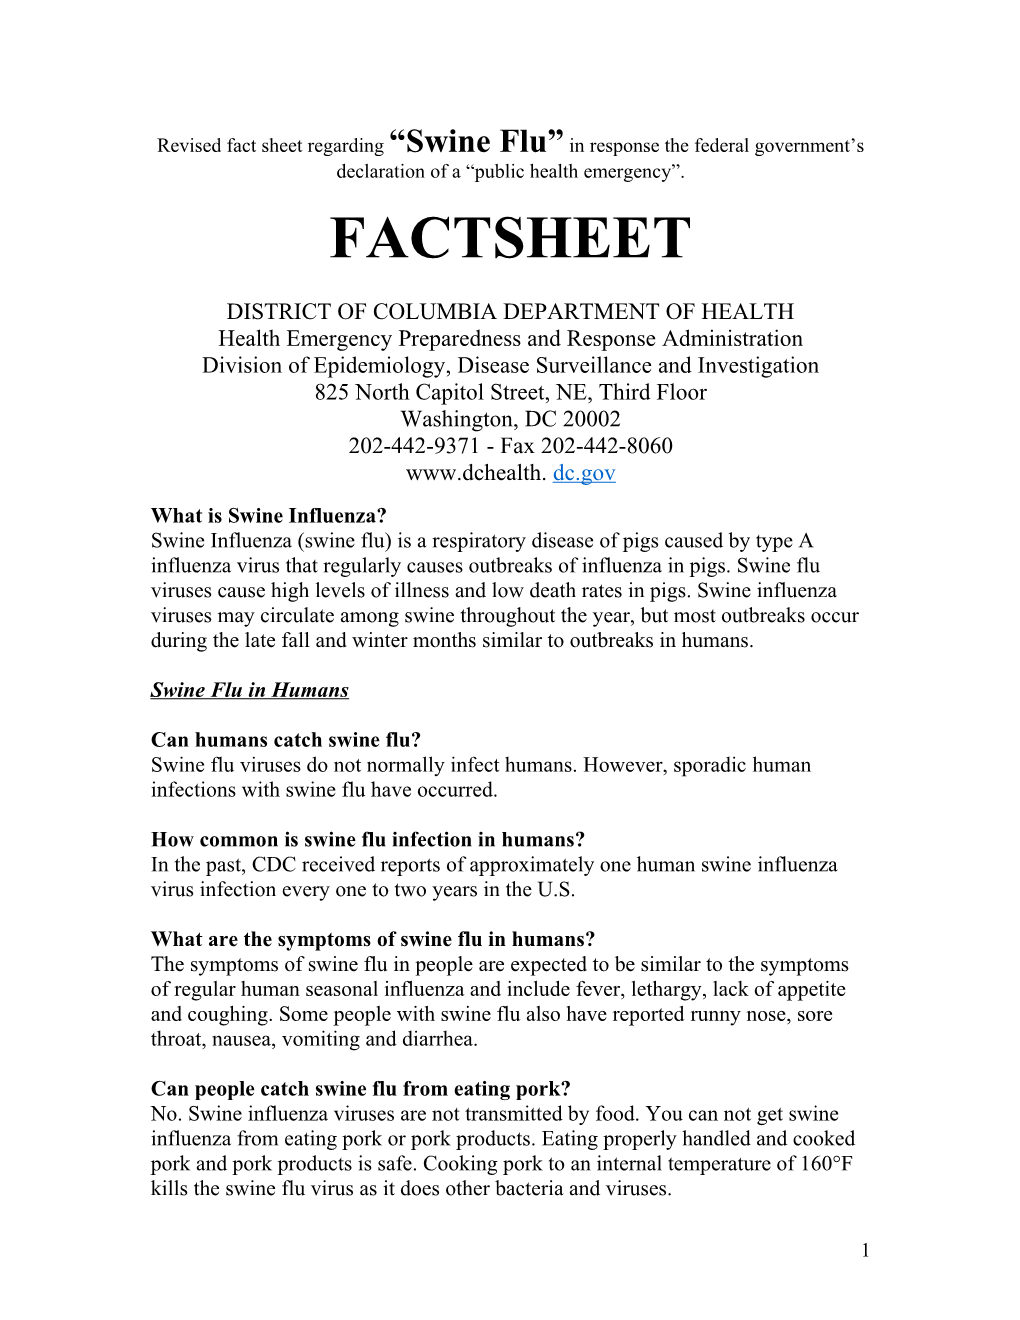 Revised Fact Sheet Regarding Swine Flu in Response the Federal Government S Declaration